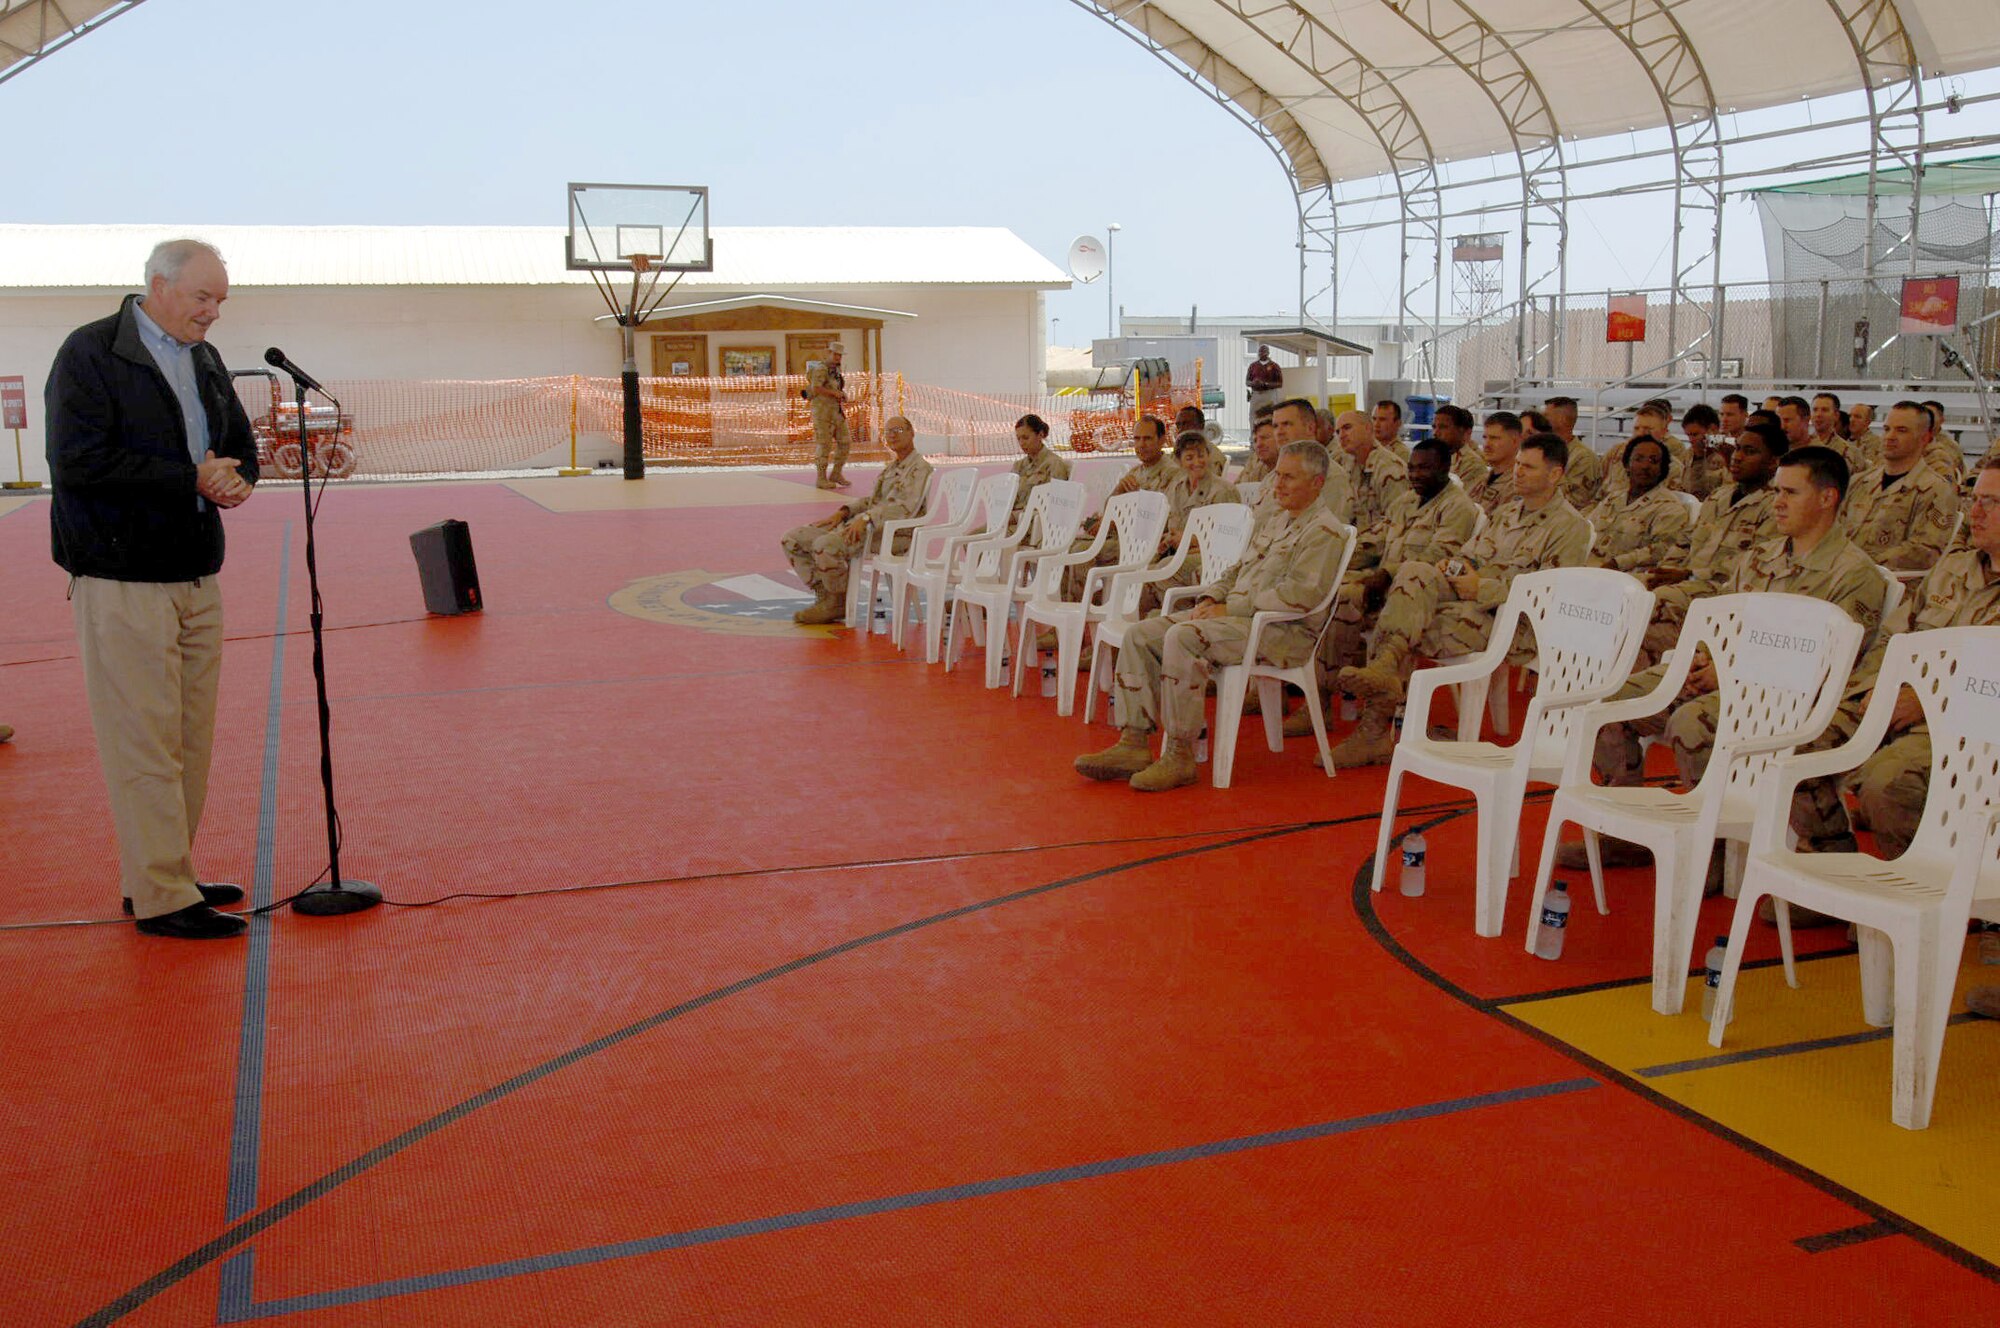 Secretary of the Air Force Michael W. Wynne holds an Airmen's Call during his March 29 visit to Camp Lemonier in Djibouti. Airmen had an opportunity to ask Secretary Wynne questions about Air Force issues. The Air Force contingency on Camp Lemonier has almost 200 Airmen who support the Combined Joint Task Force-Horn of Africa mission. (U.S. Air Force photo/Tech. Sgt. Lee Harshman)